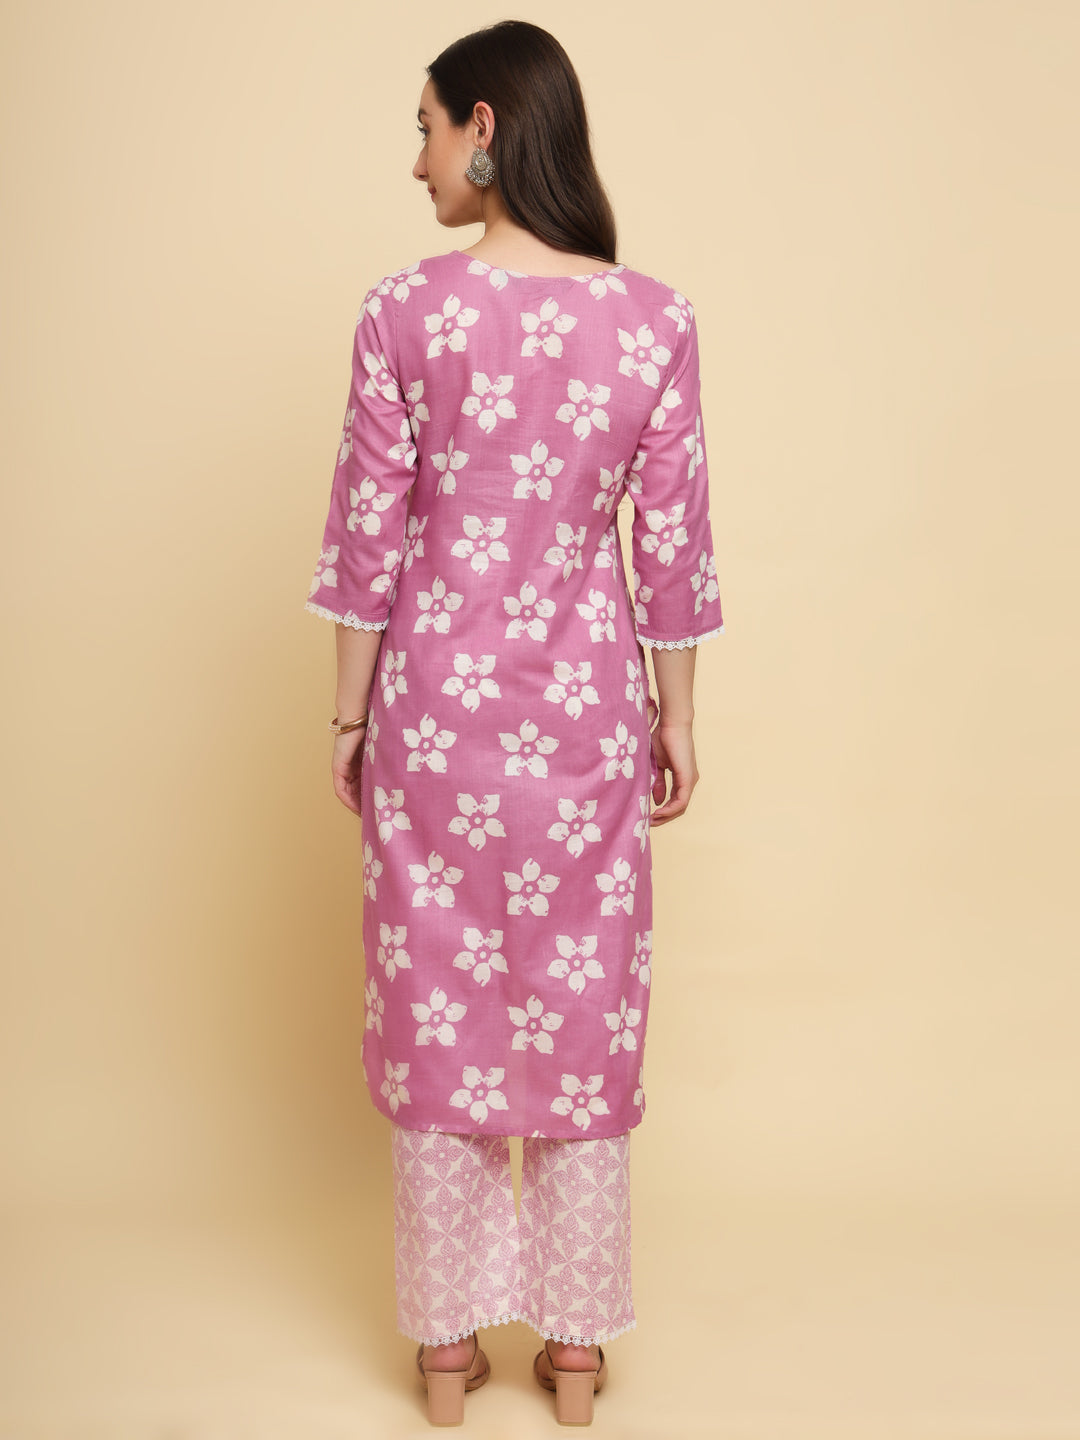 Pink & white printed Kurta with Trousers with dupatta